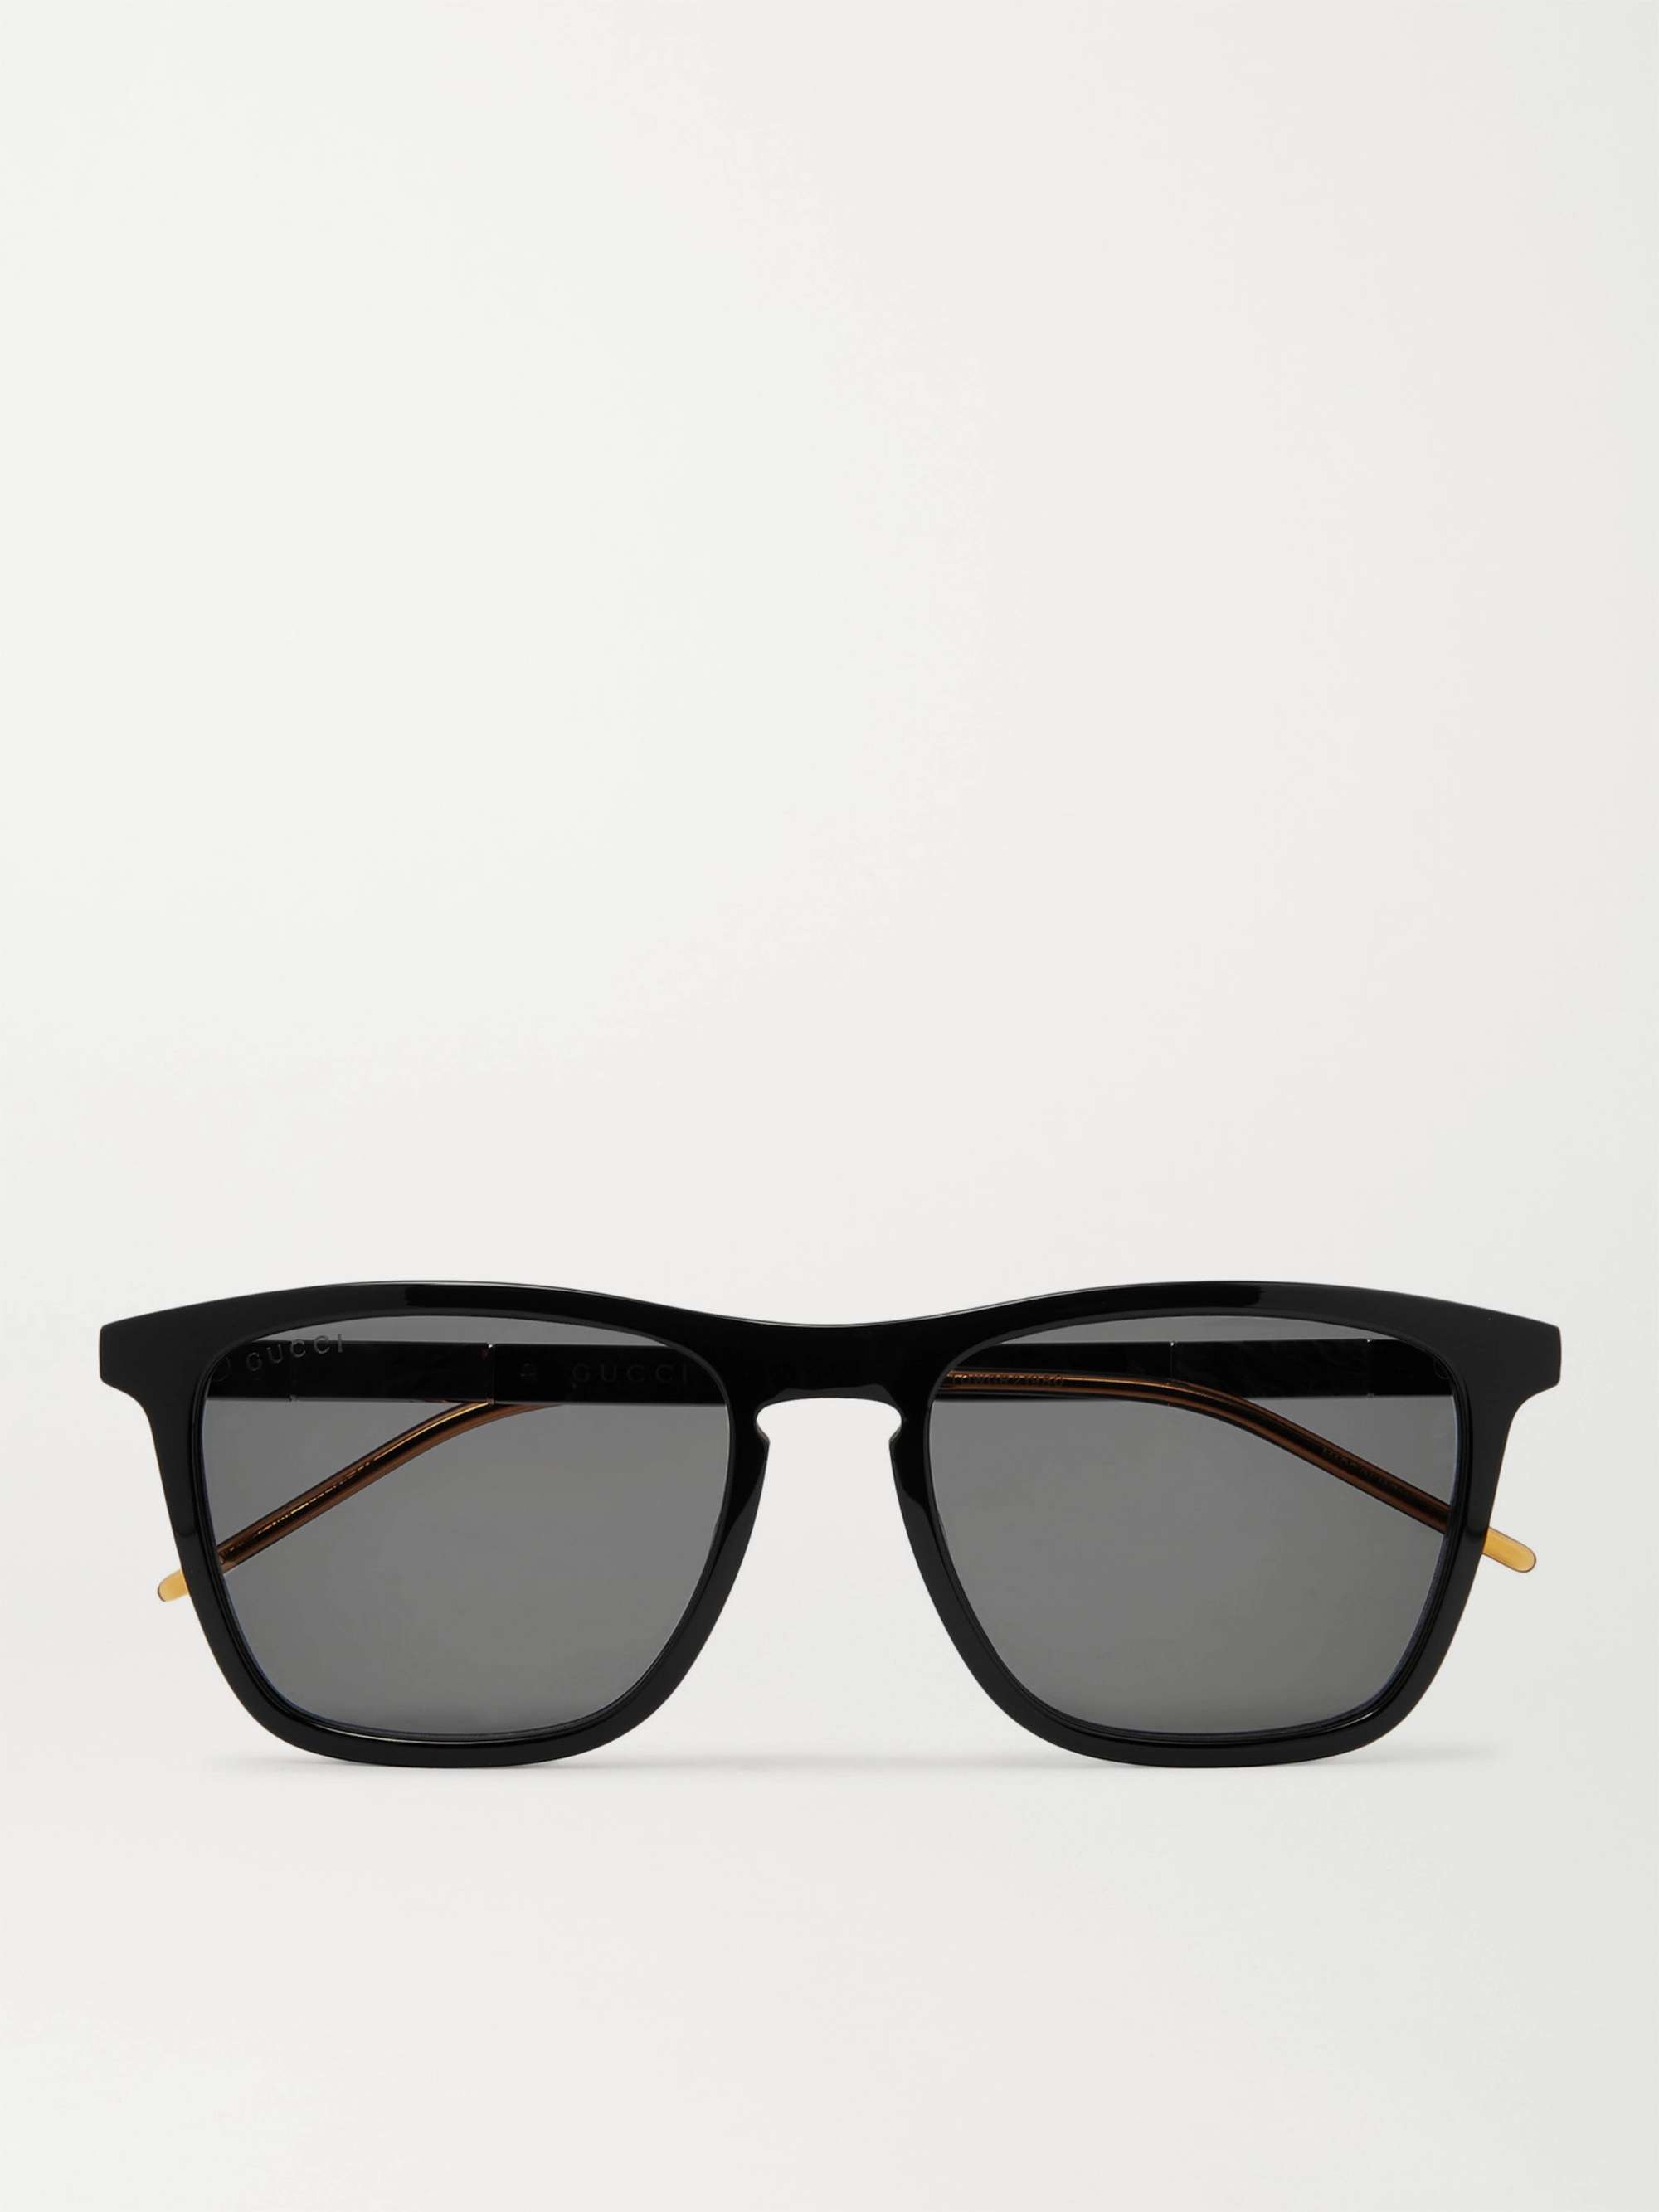 GUCCI EYEWEAR Square-Frame Acetate and Gold-Tone Sunglasses